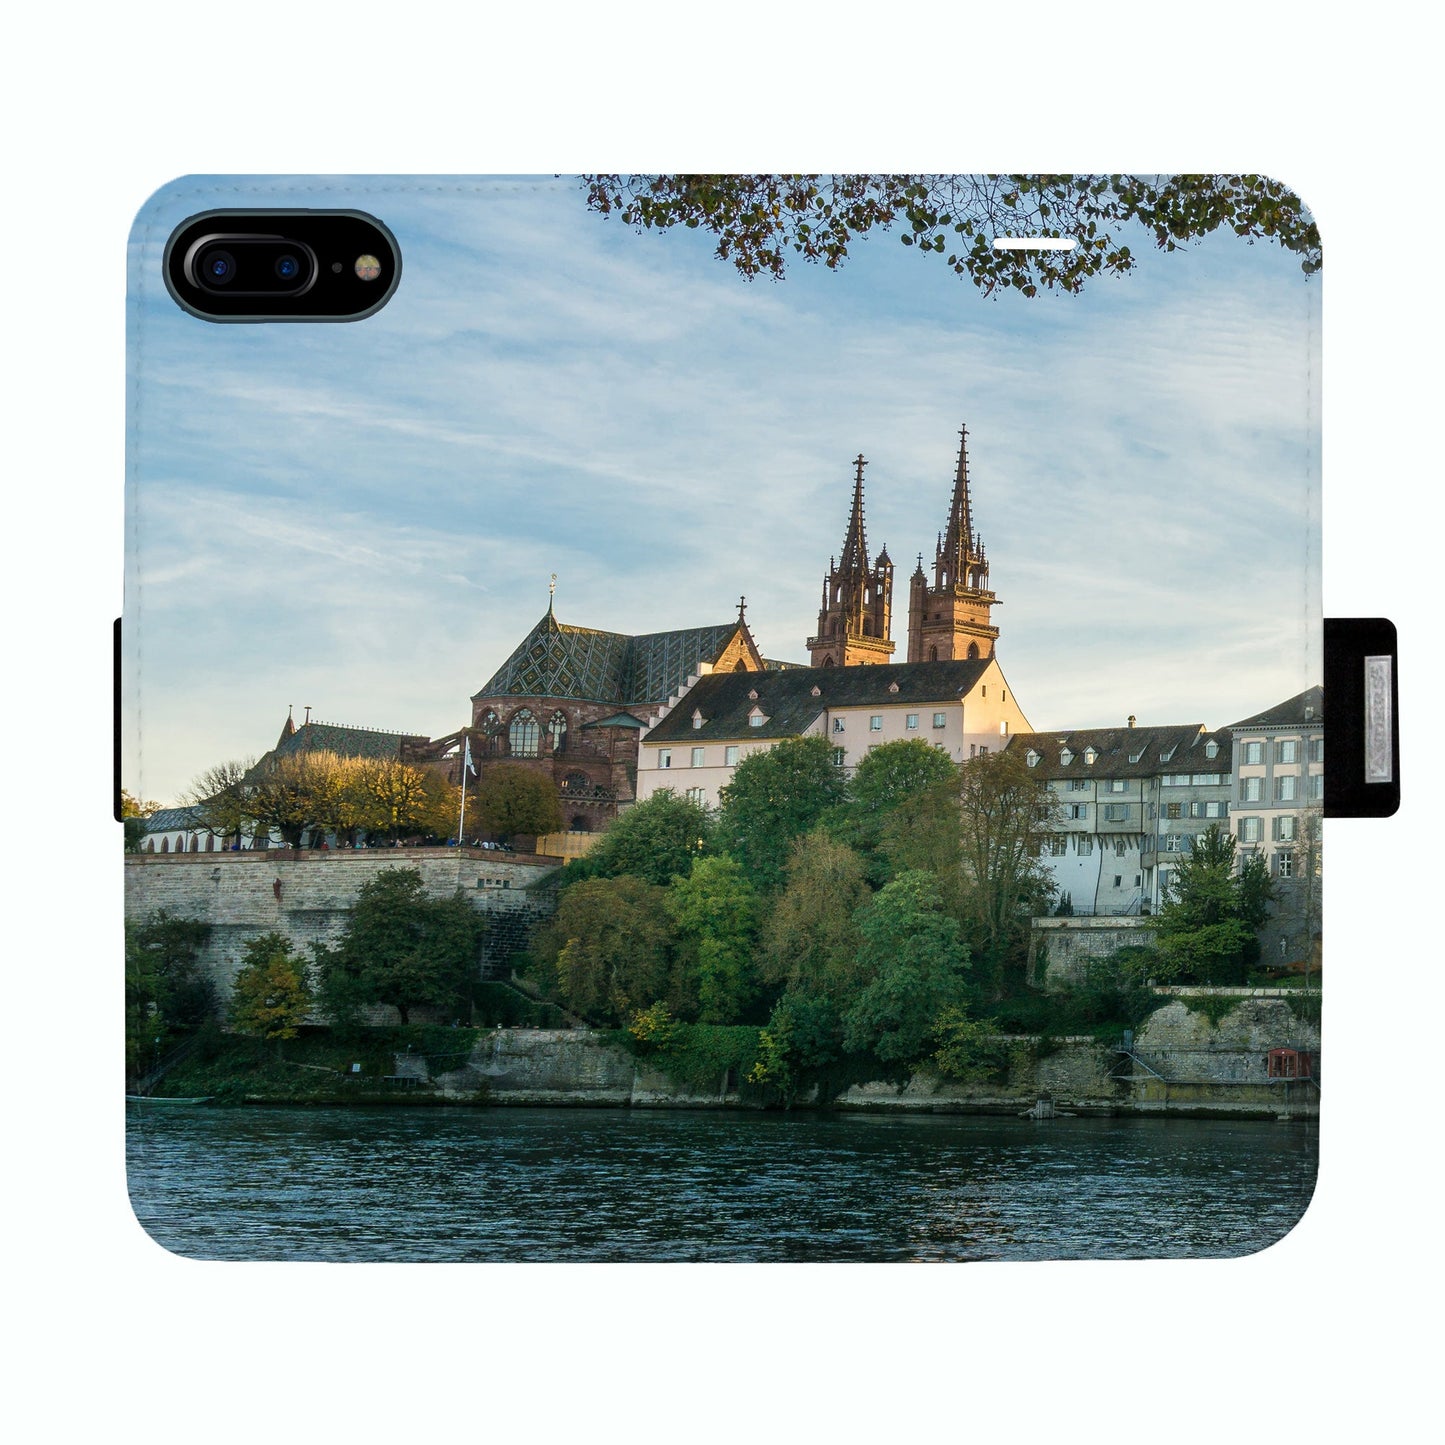 Basel City Rhein Victor Case for iPhone 6/6S/7/8 Plus